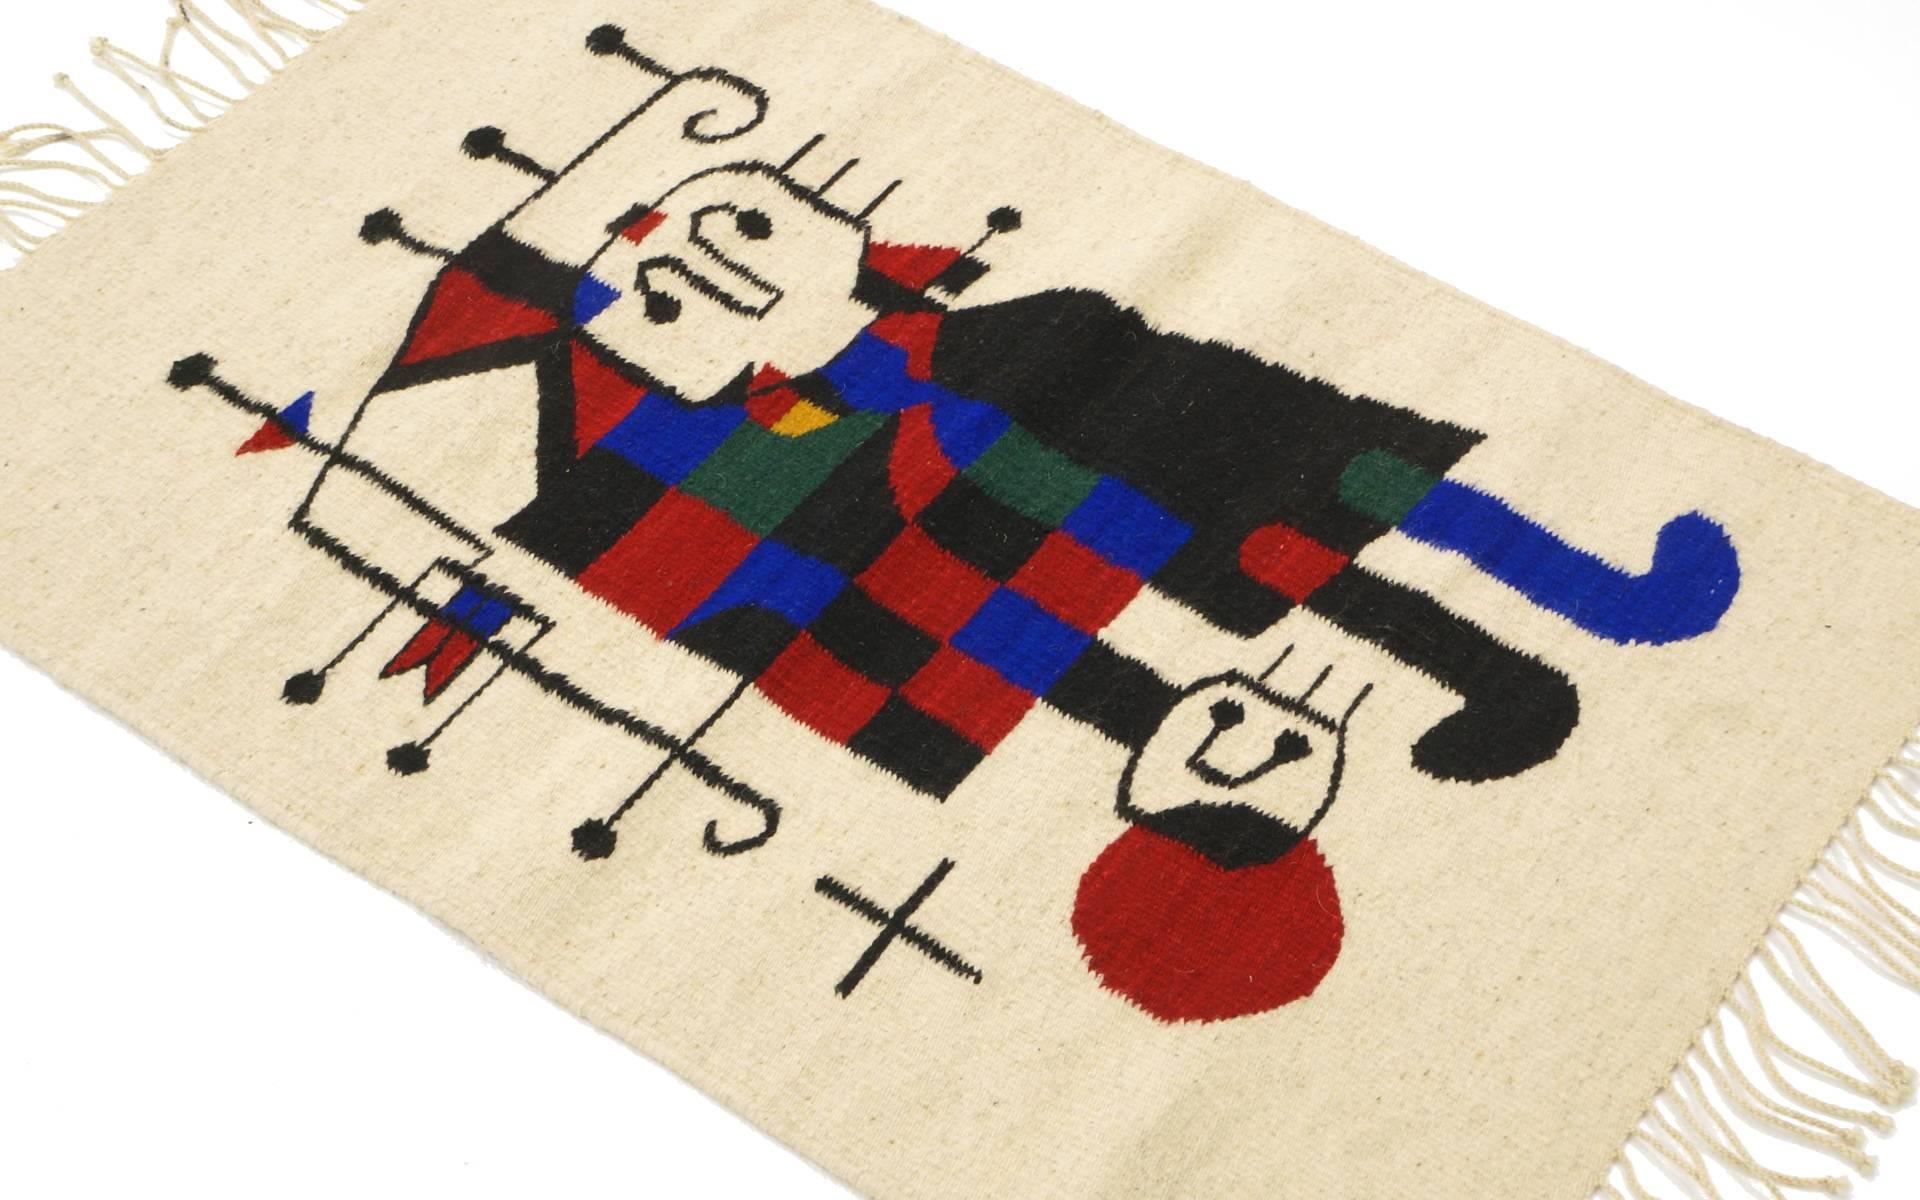 1960s wall hanging tapestry in the style of Joan Miro. Excellent condition.